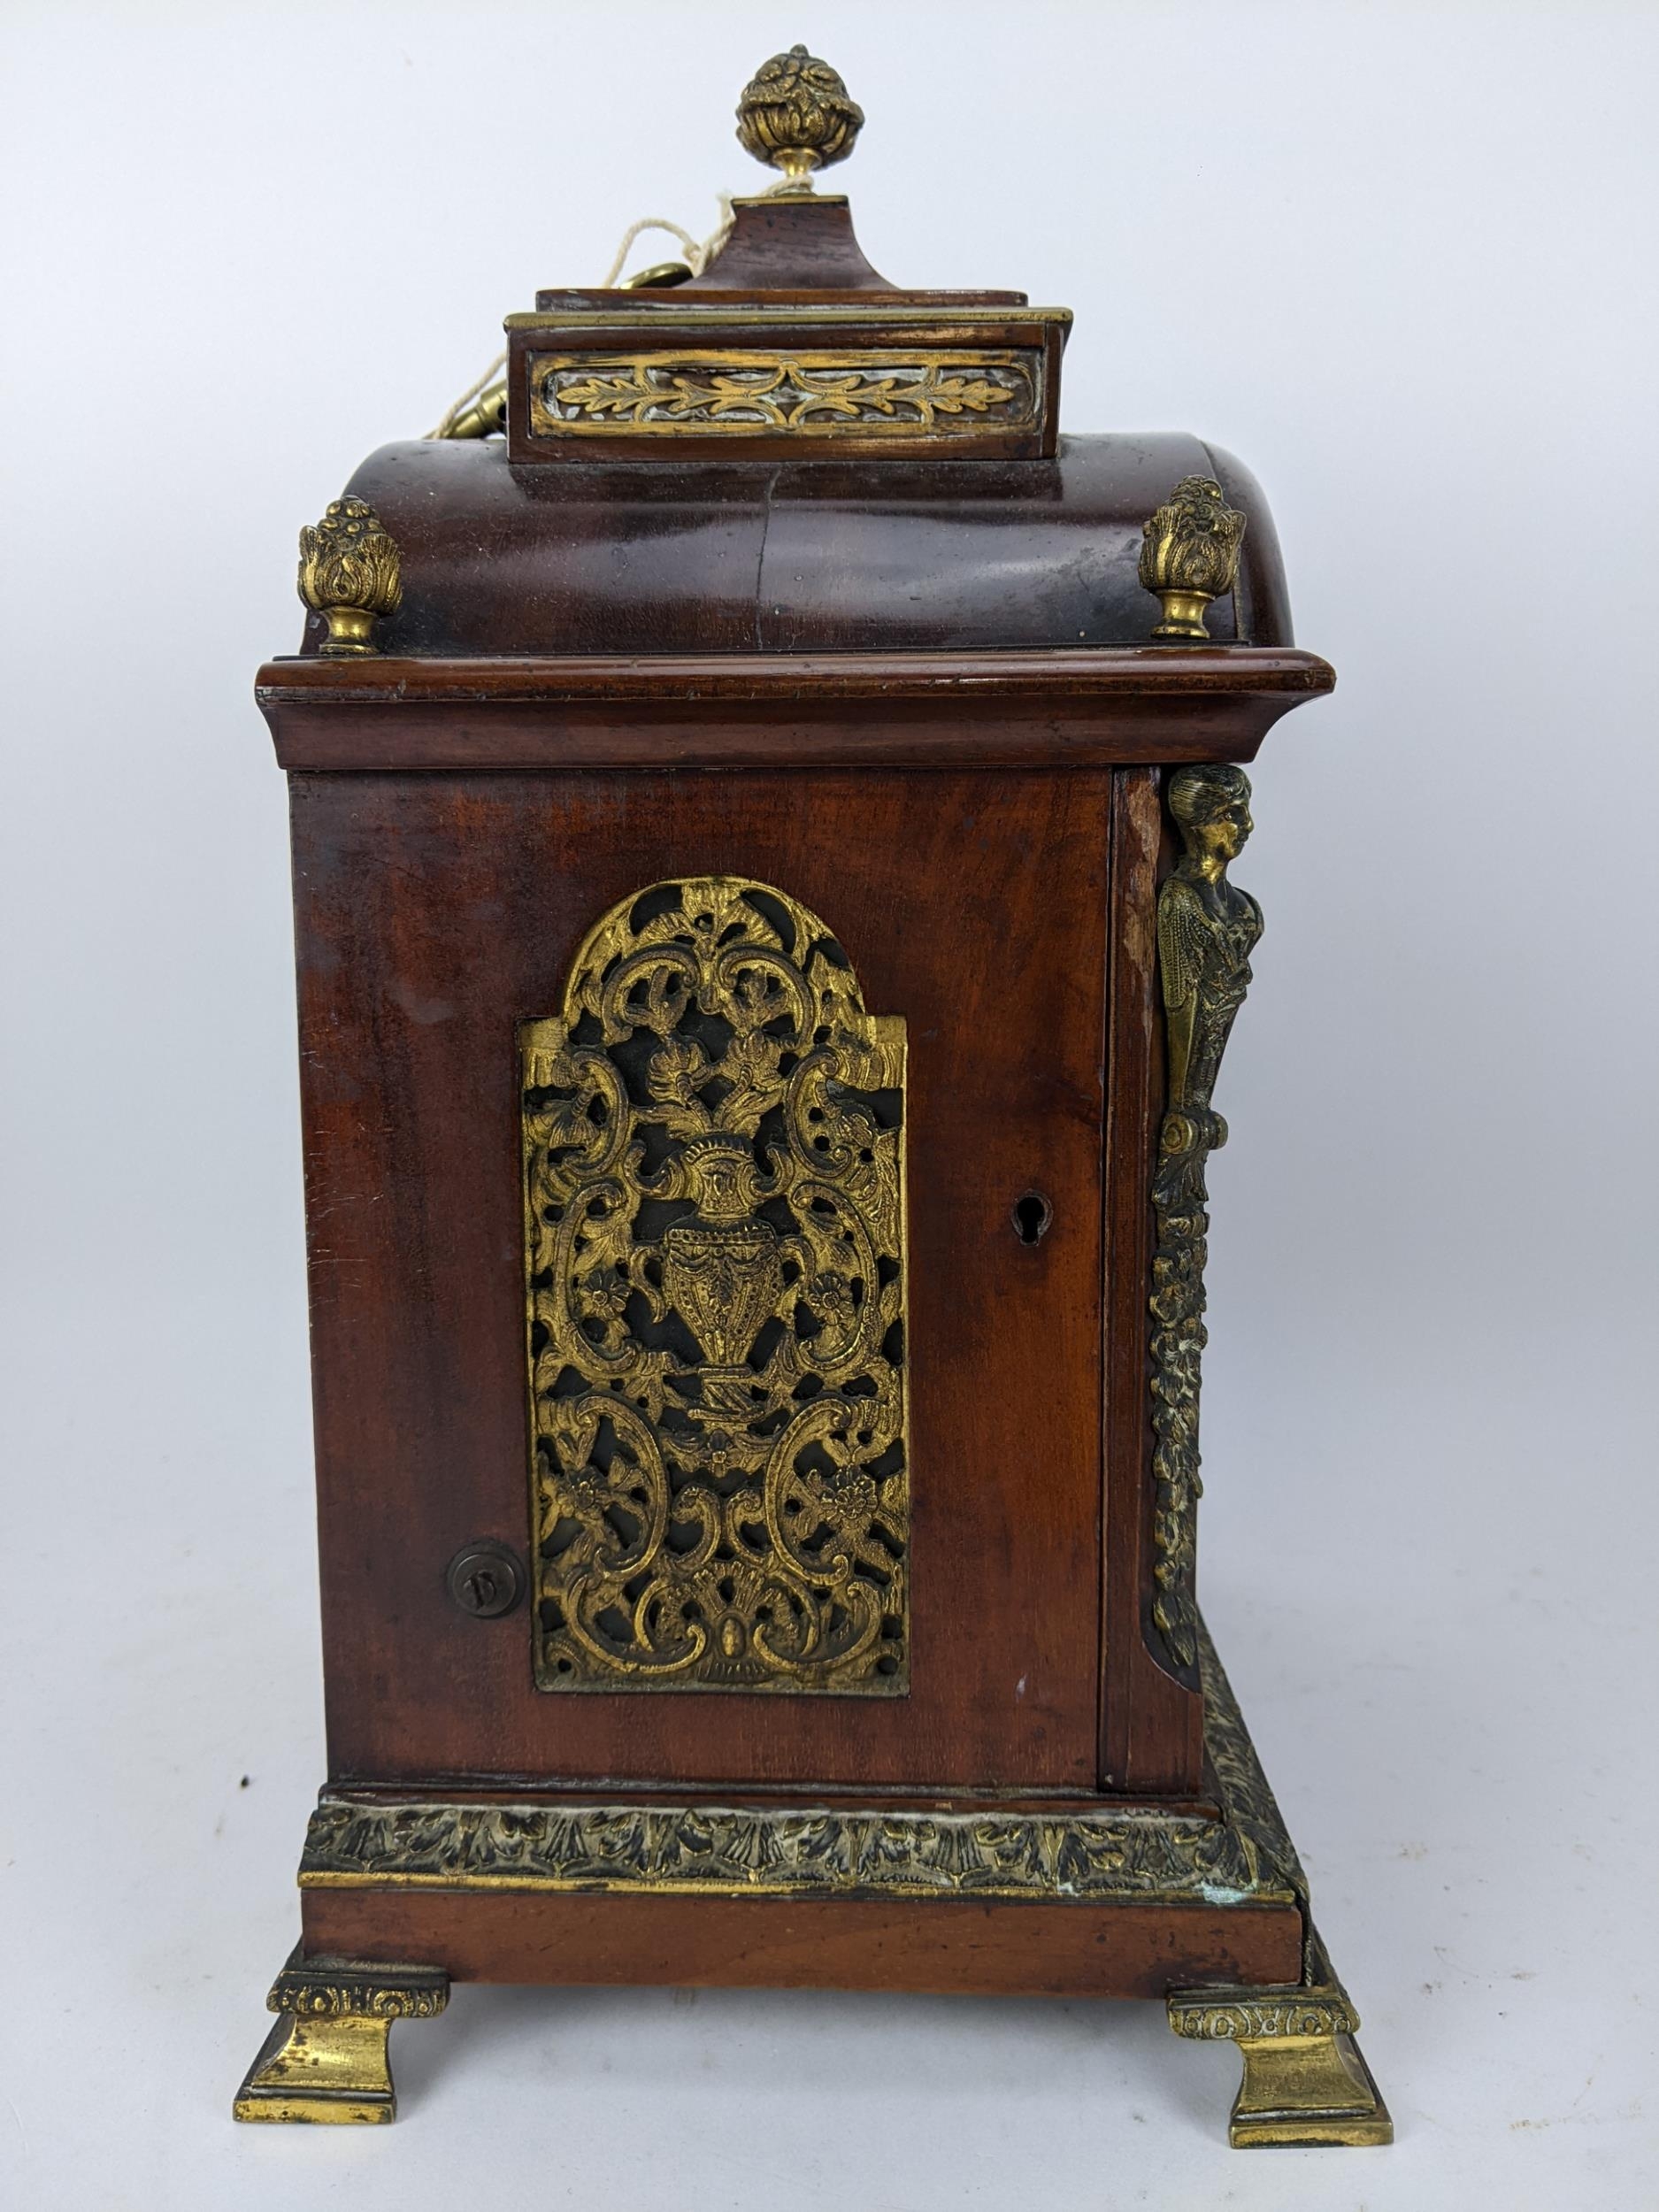 A late 19th/early 20th century mahogany bracket clock, the case having basket of flowers finials, - Image 3 of 5